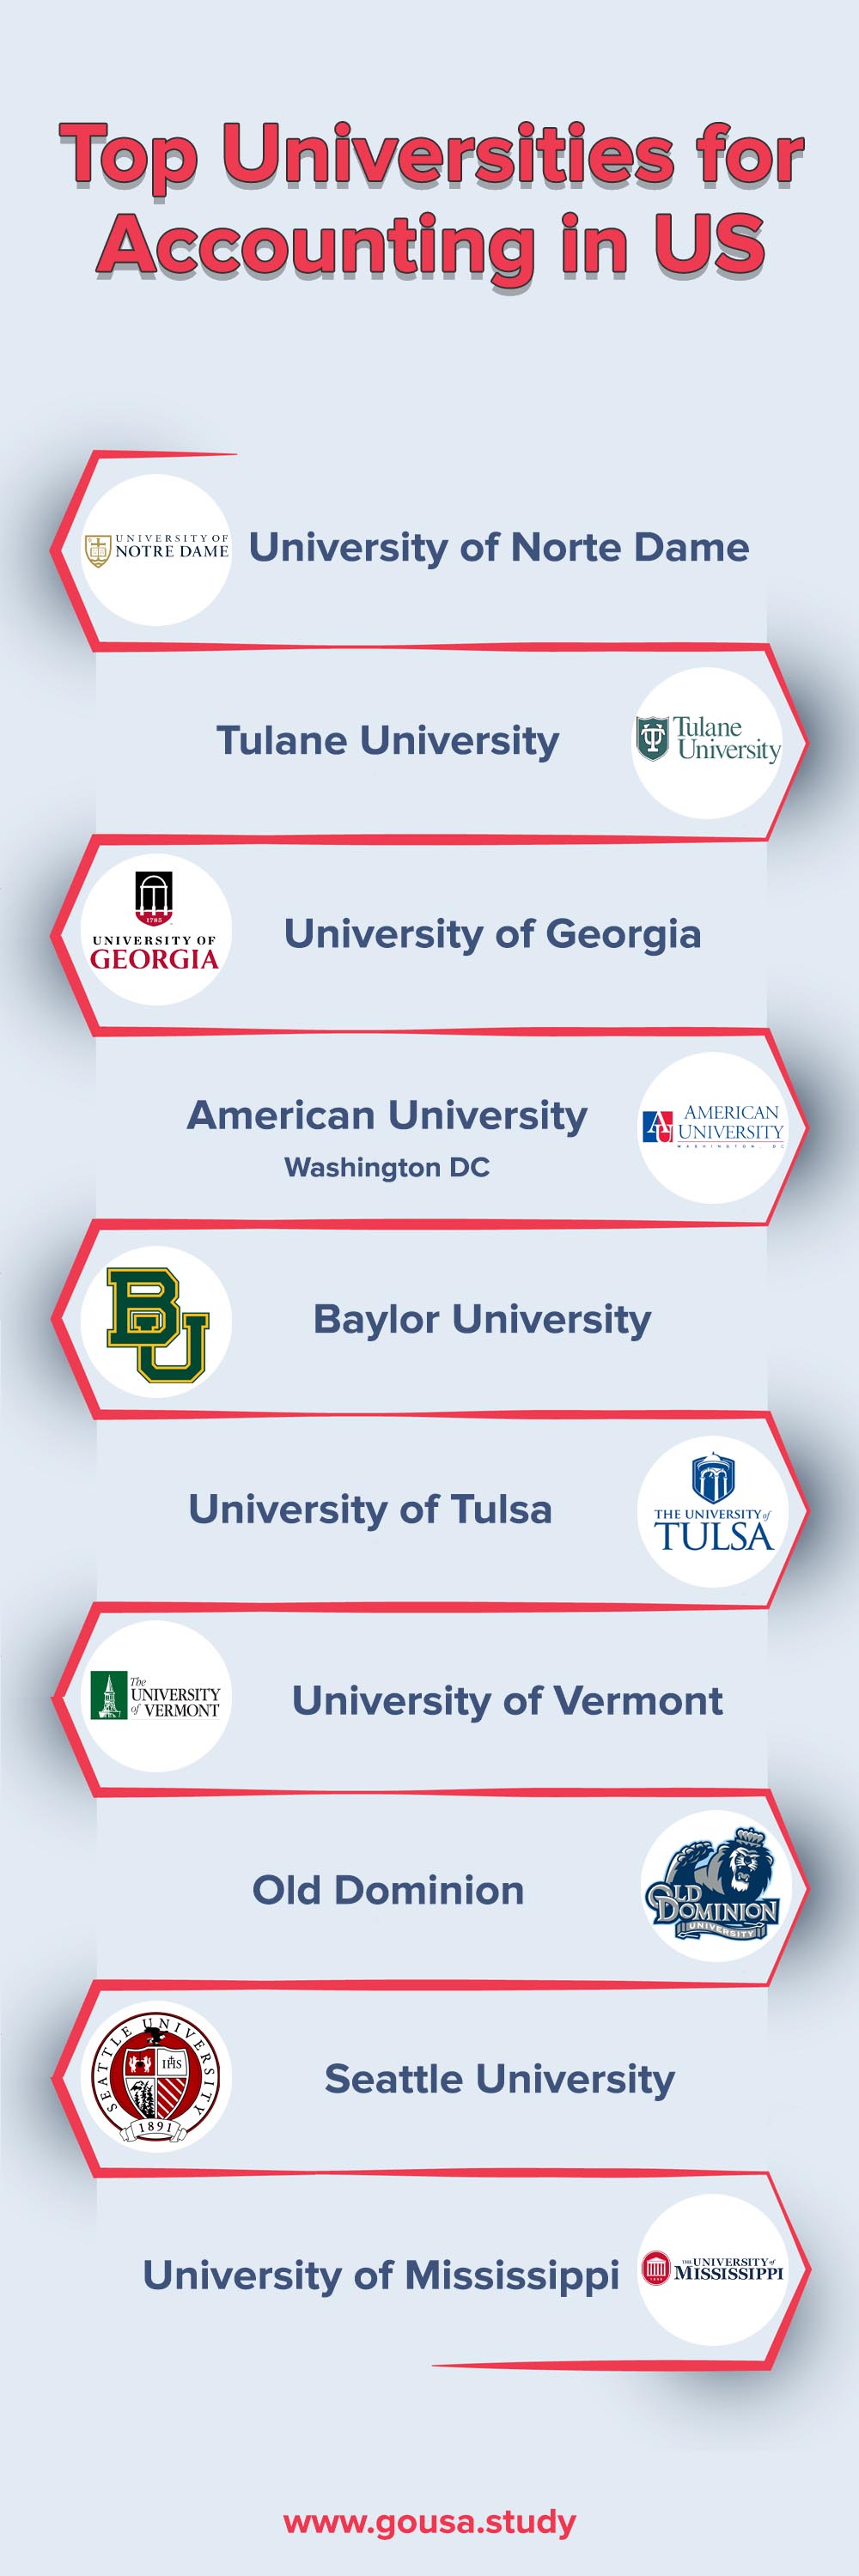 Top Universities for Accounting in US